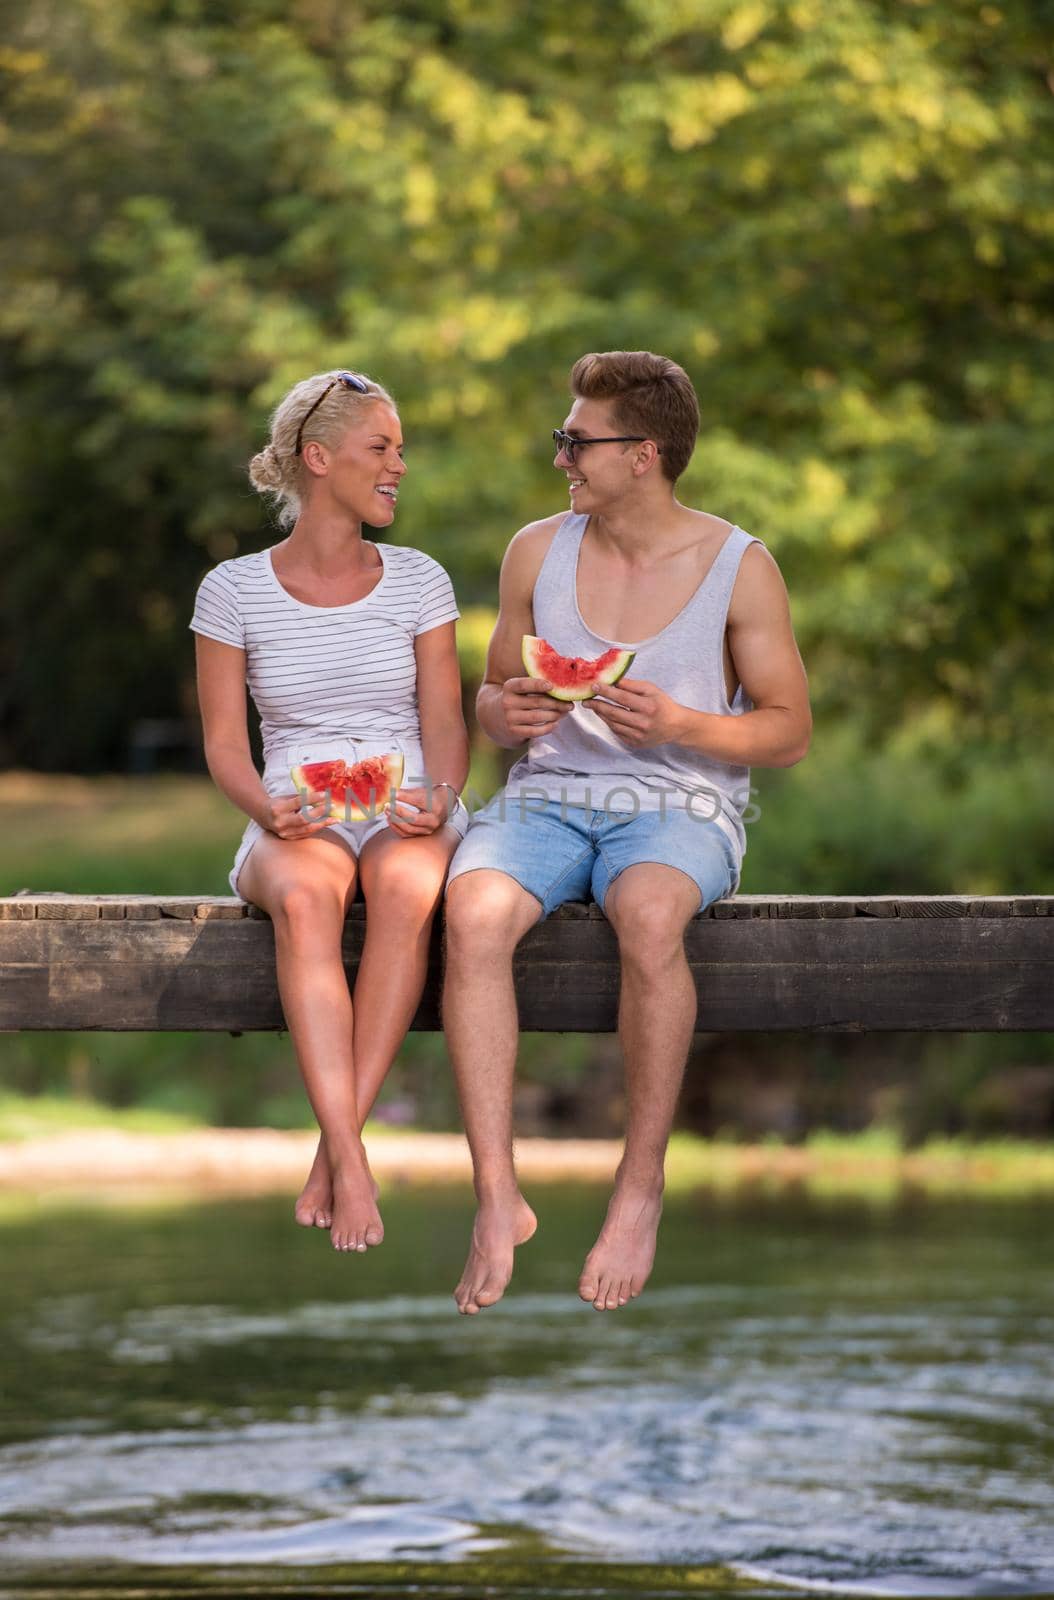 couple in love enjoying watermelon while sitting on the wooden bridge over the river in beautiful nature